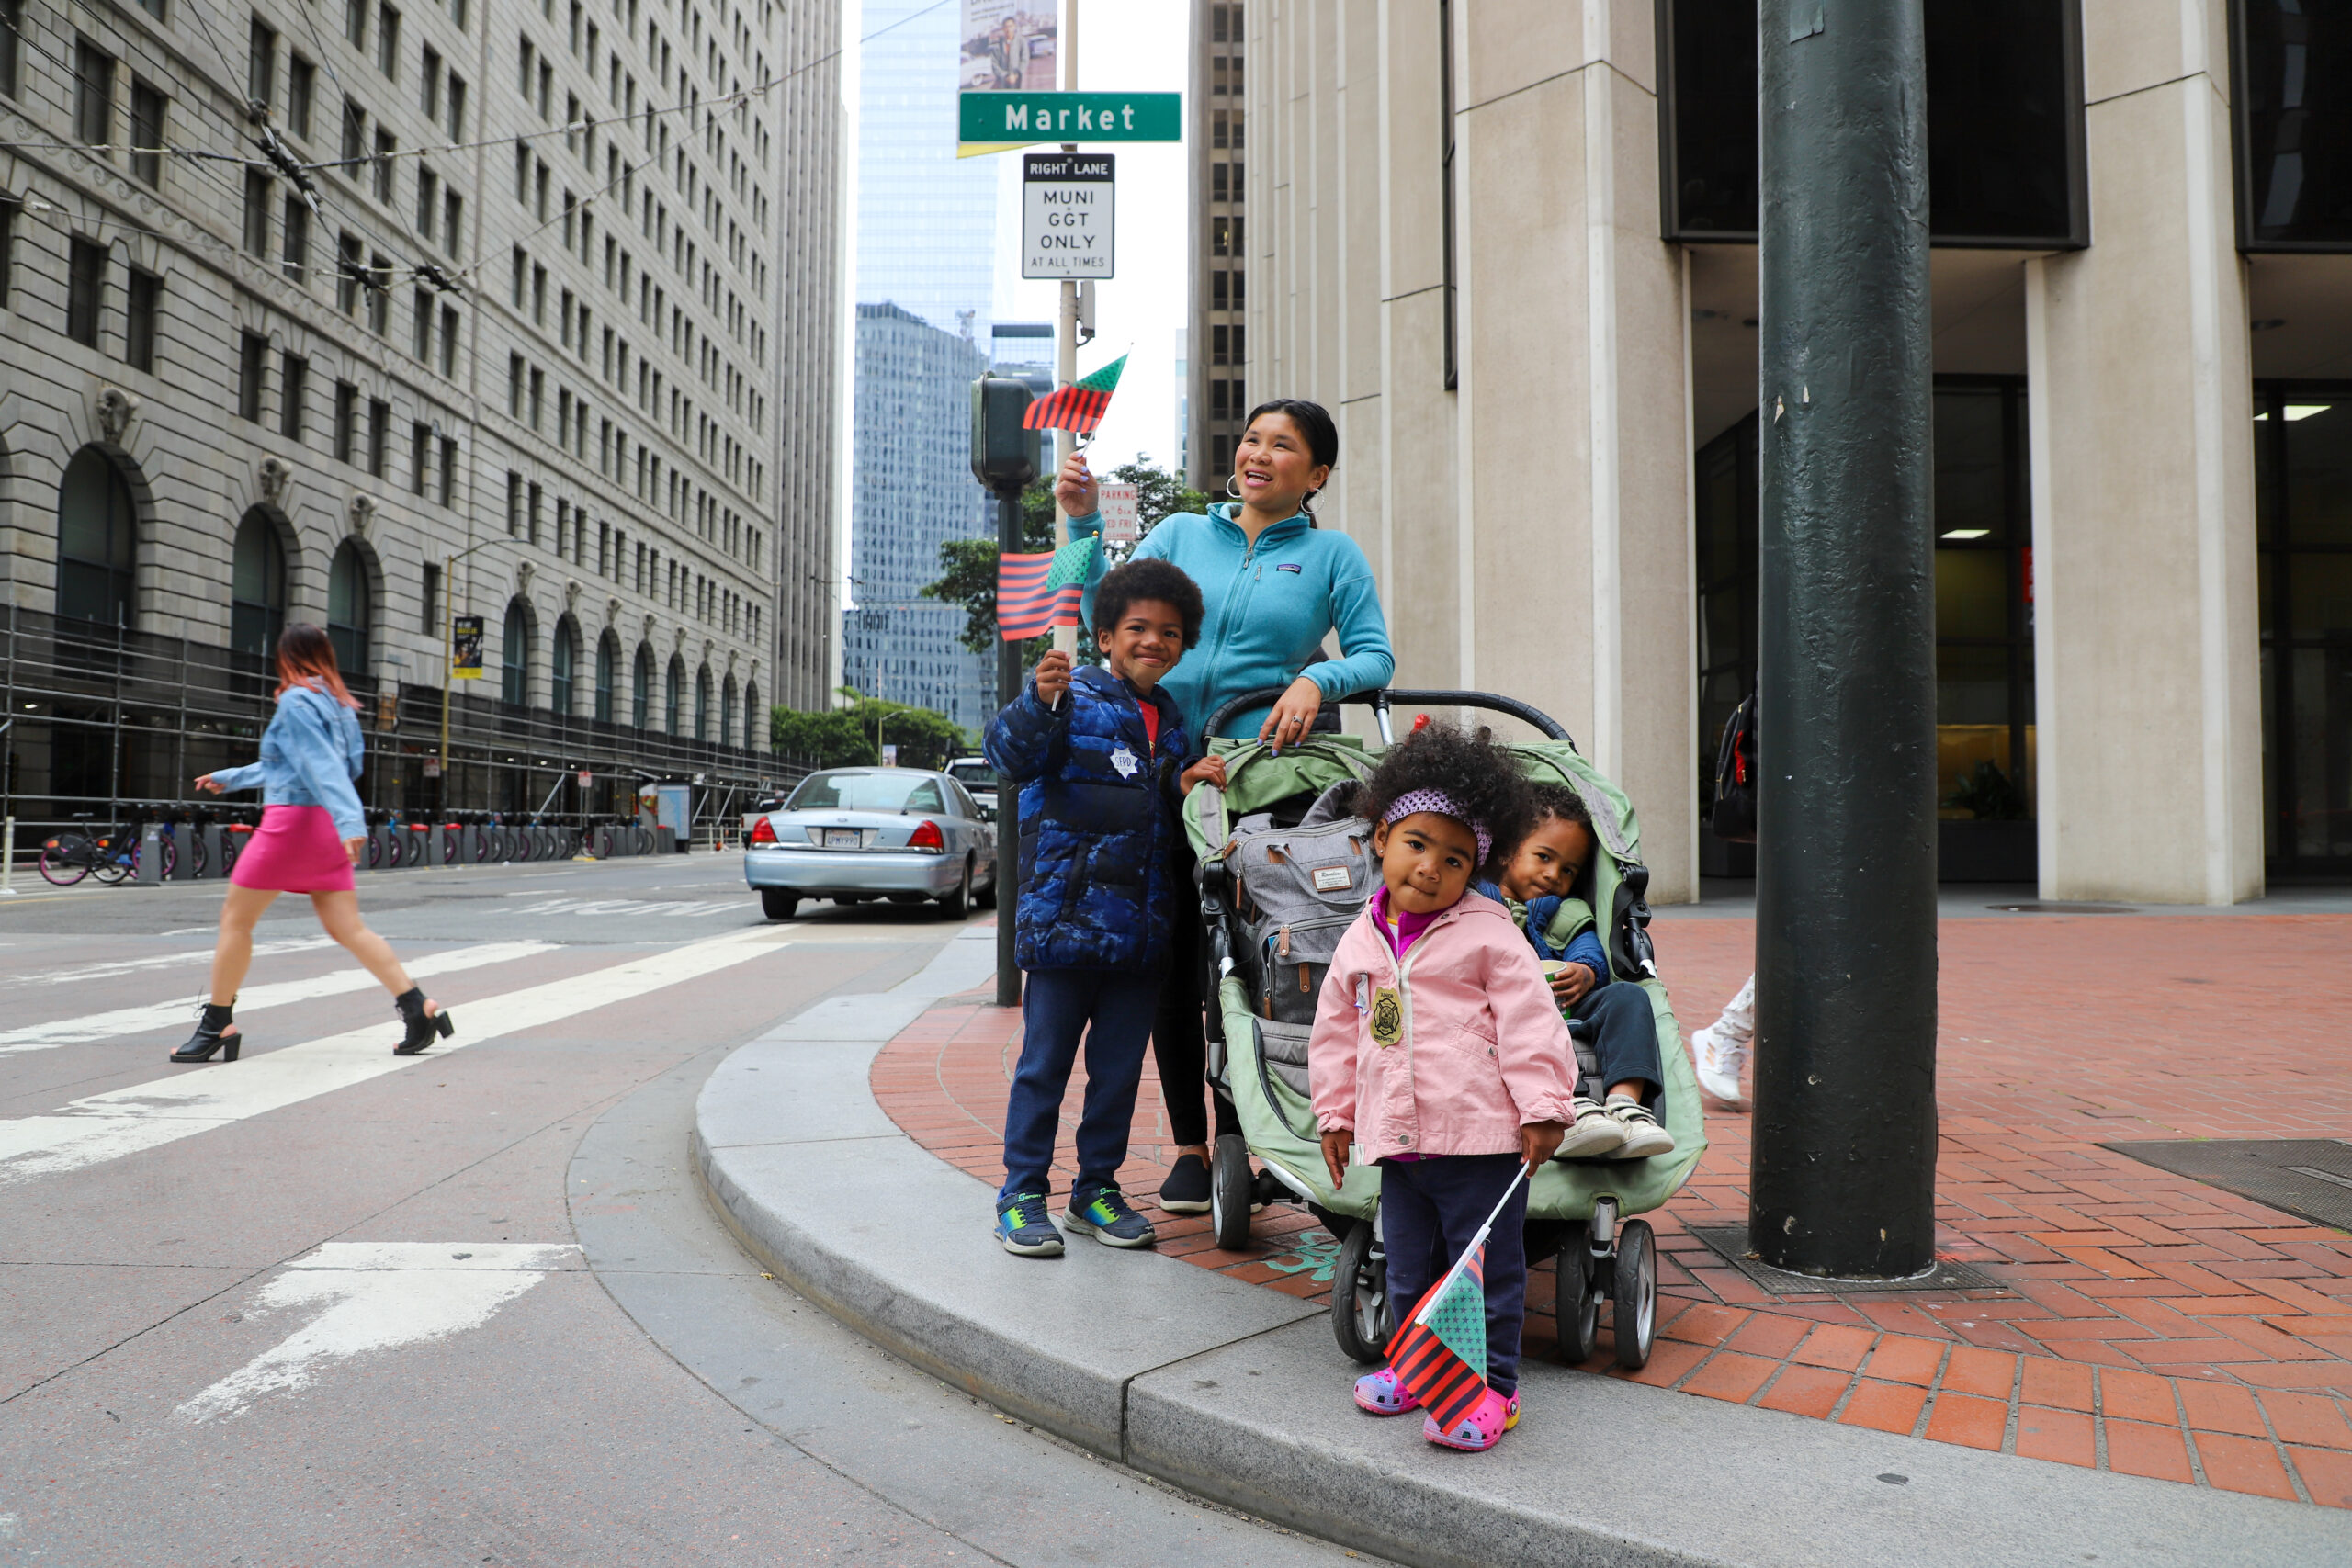 A woman and three kids on a sidewalk. One child is waving a flag.